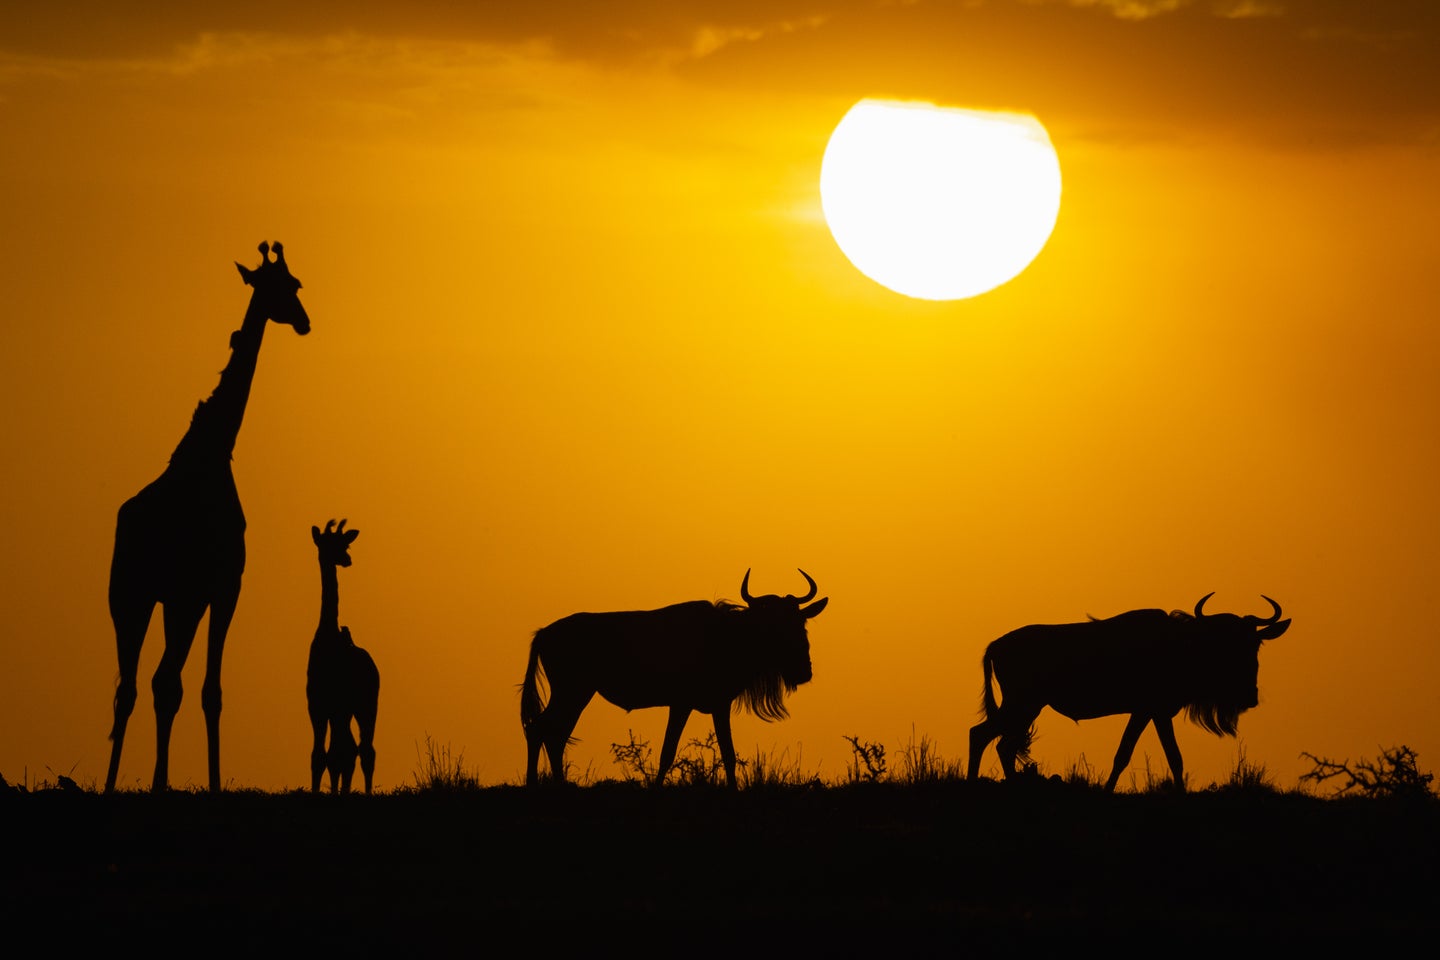 Silhouette of giraffe and other animals against orange sky